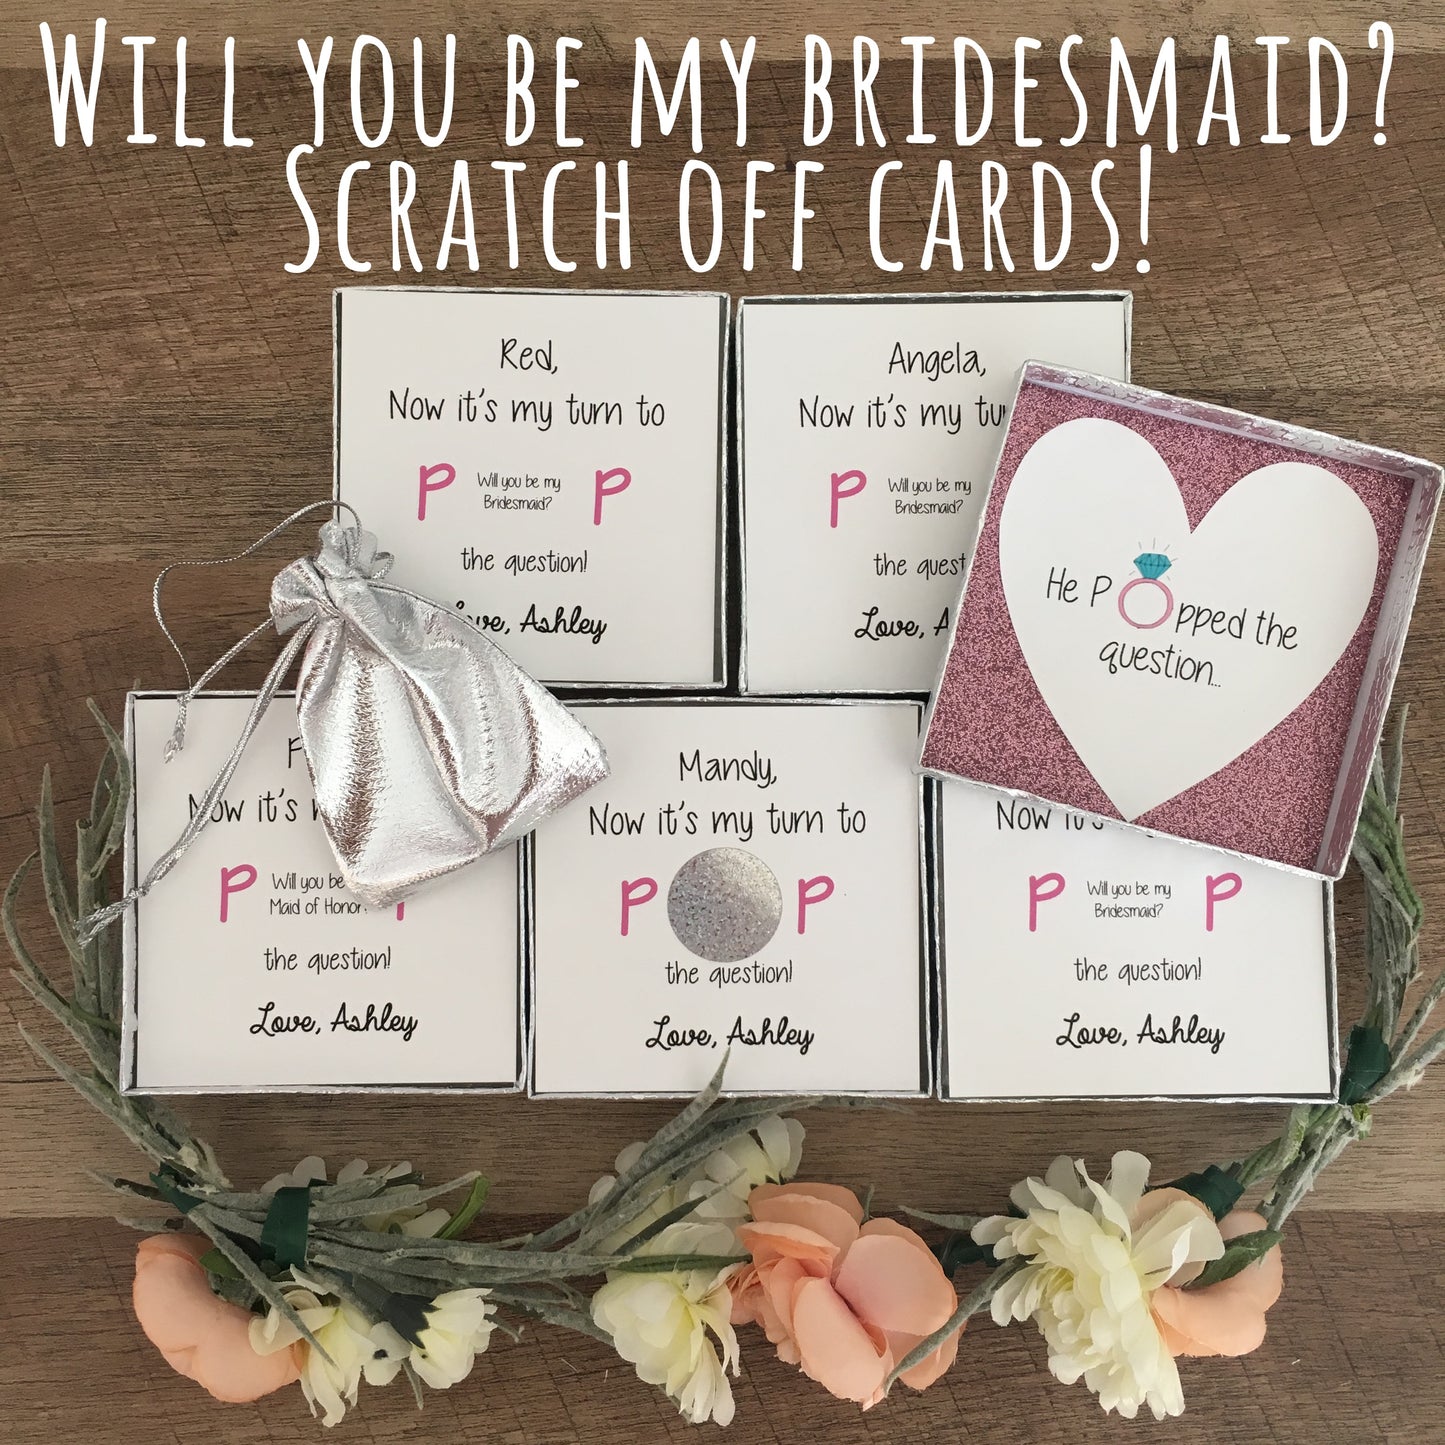 Will You Be My Bridesmaid Scratch Off Cards!